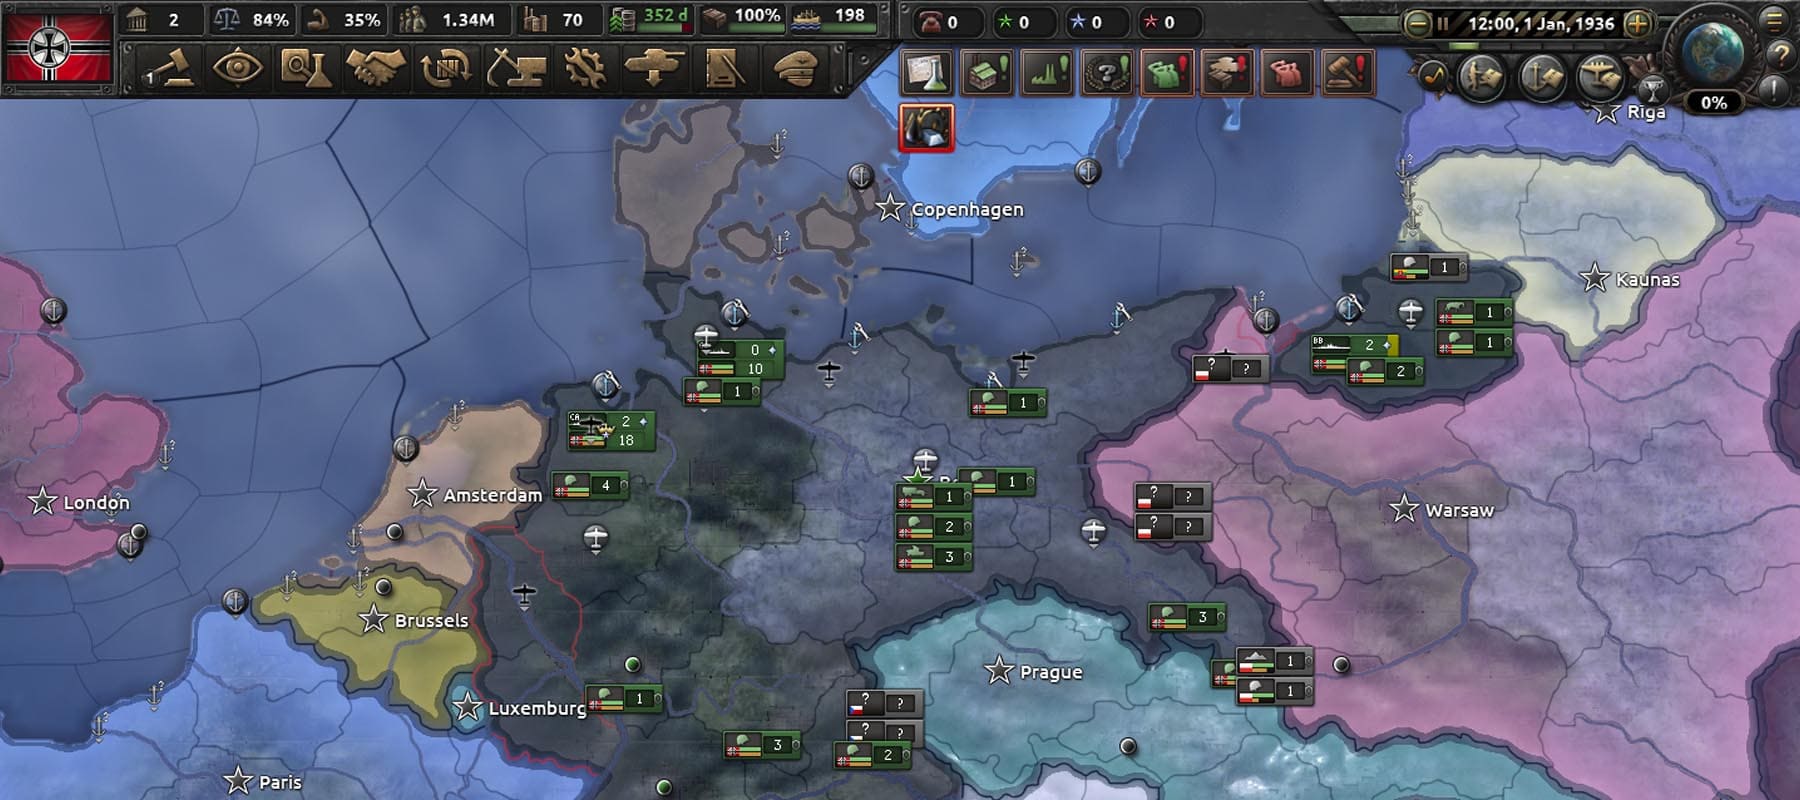 Hearts of Iron IV game